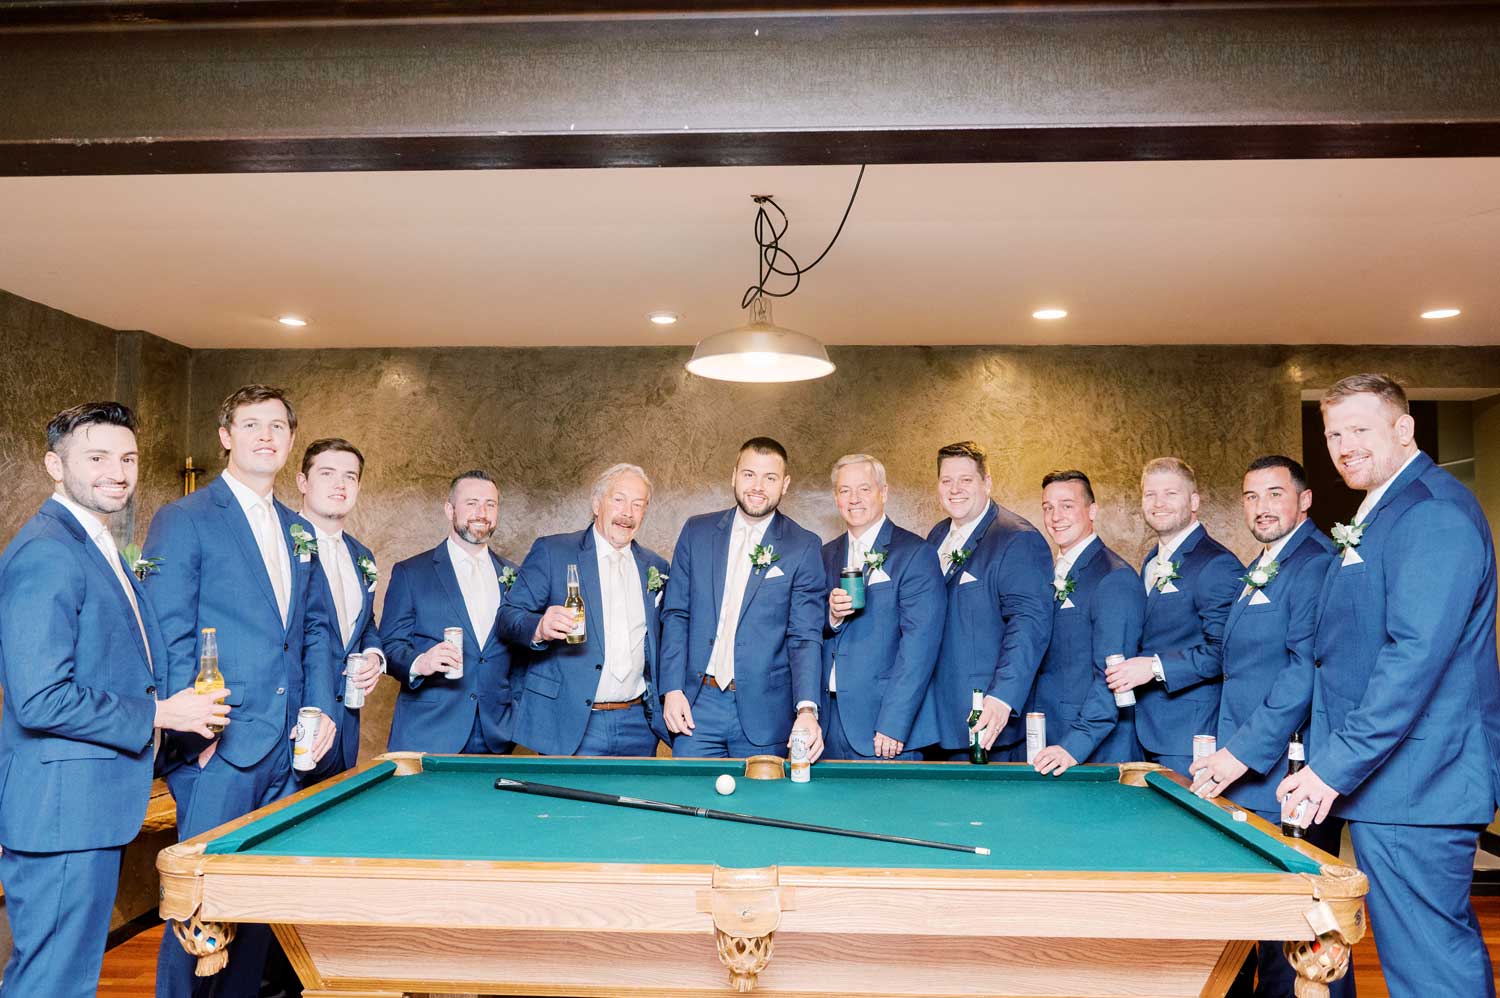 A group of groomsmen posing for a wedding experience picture in front of a pool table.